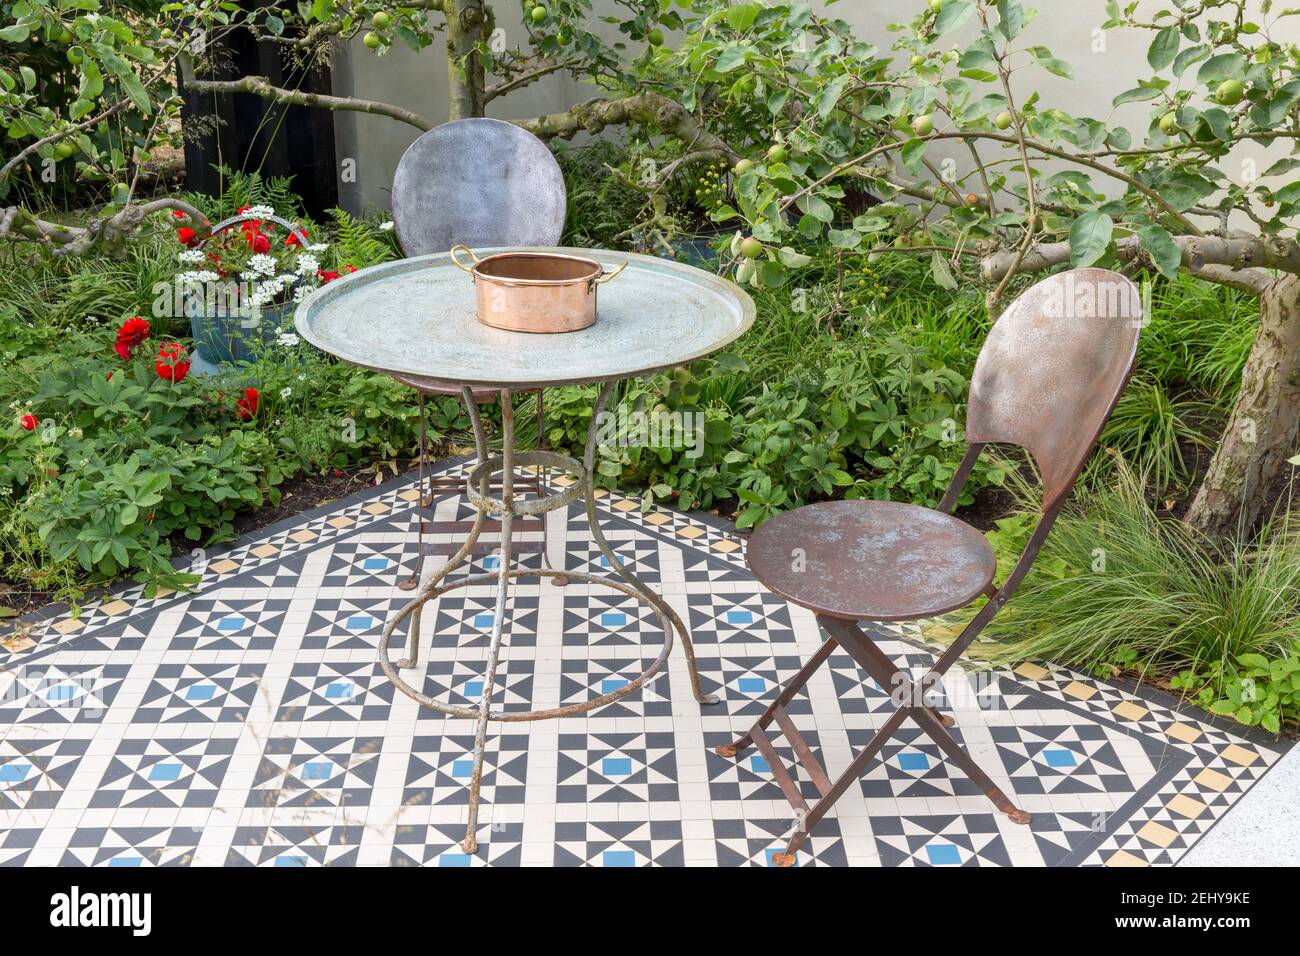 Garden furniture with vintage metal vintage table and chairs on tiled mosaic patio paved paving with apple trees behind a rendered wall England GB UK Stock Photo